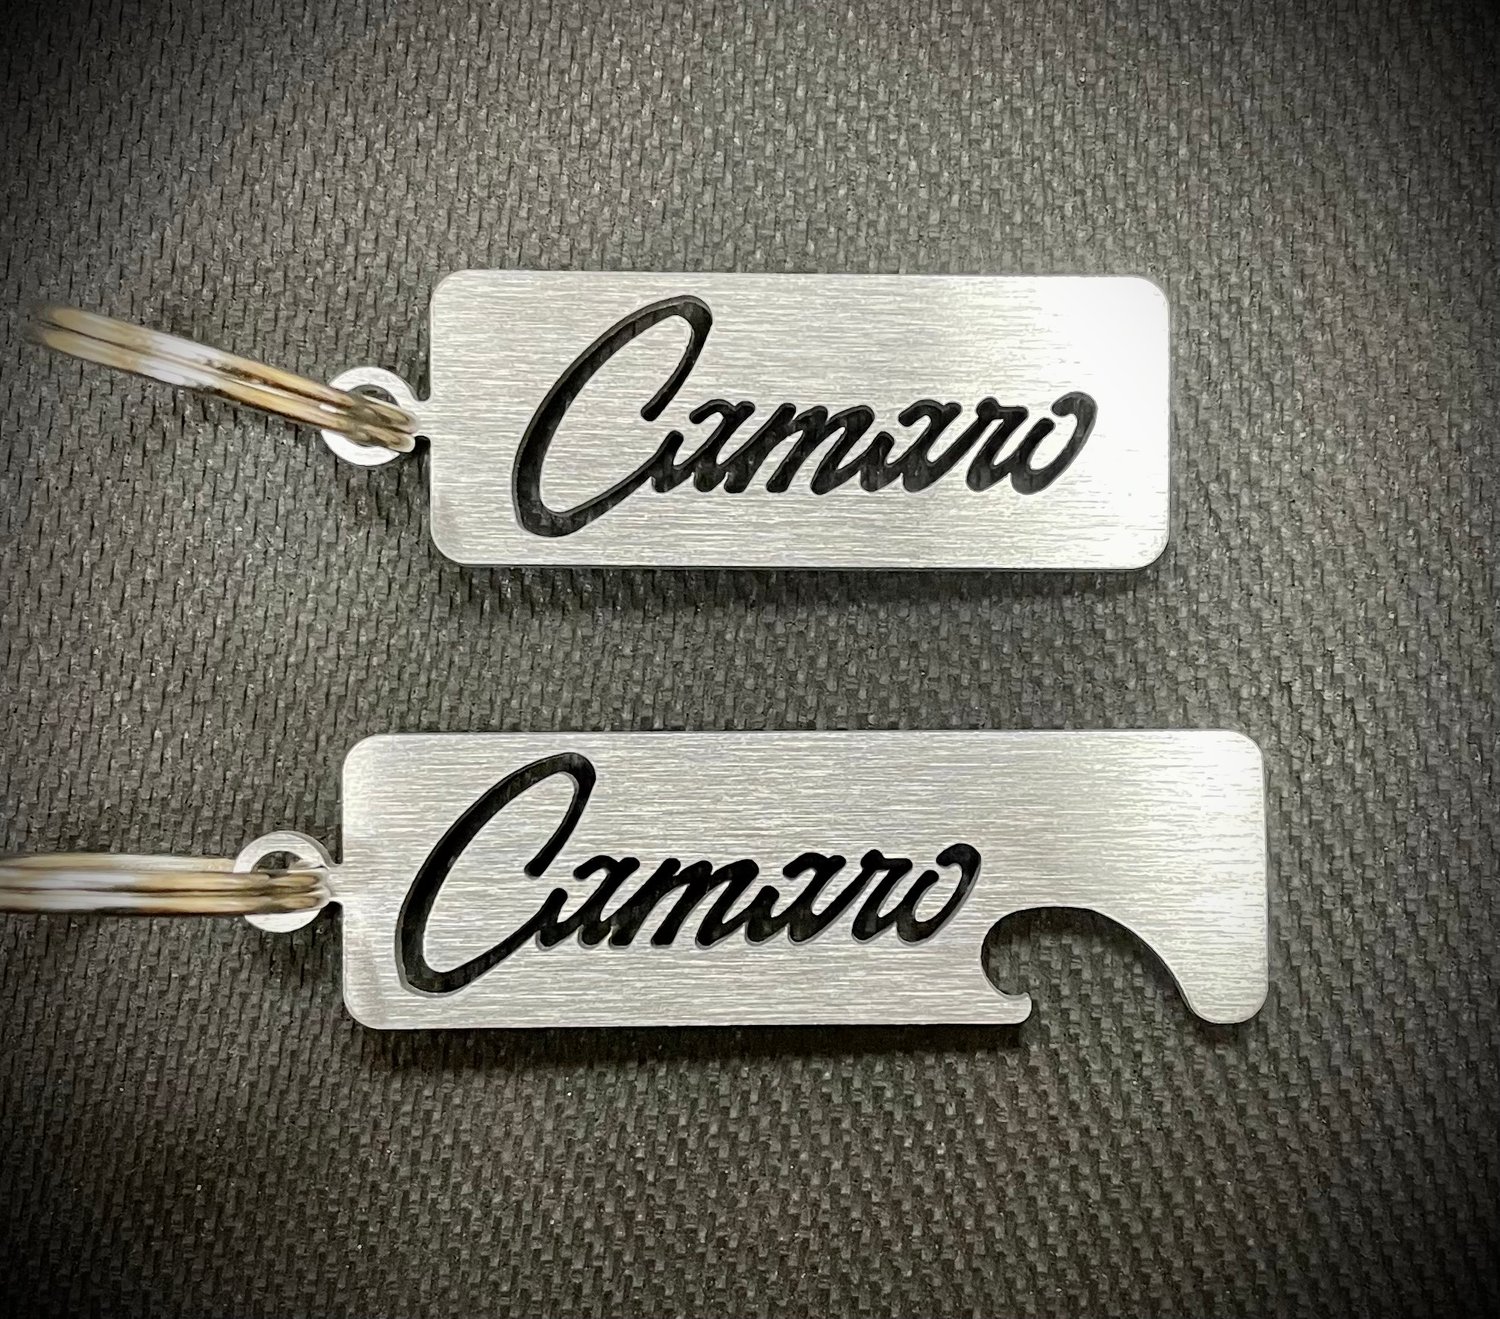 For Camaro Enthusiasts script style 